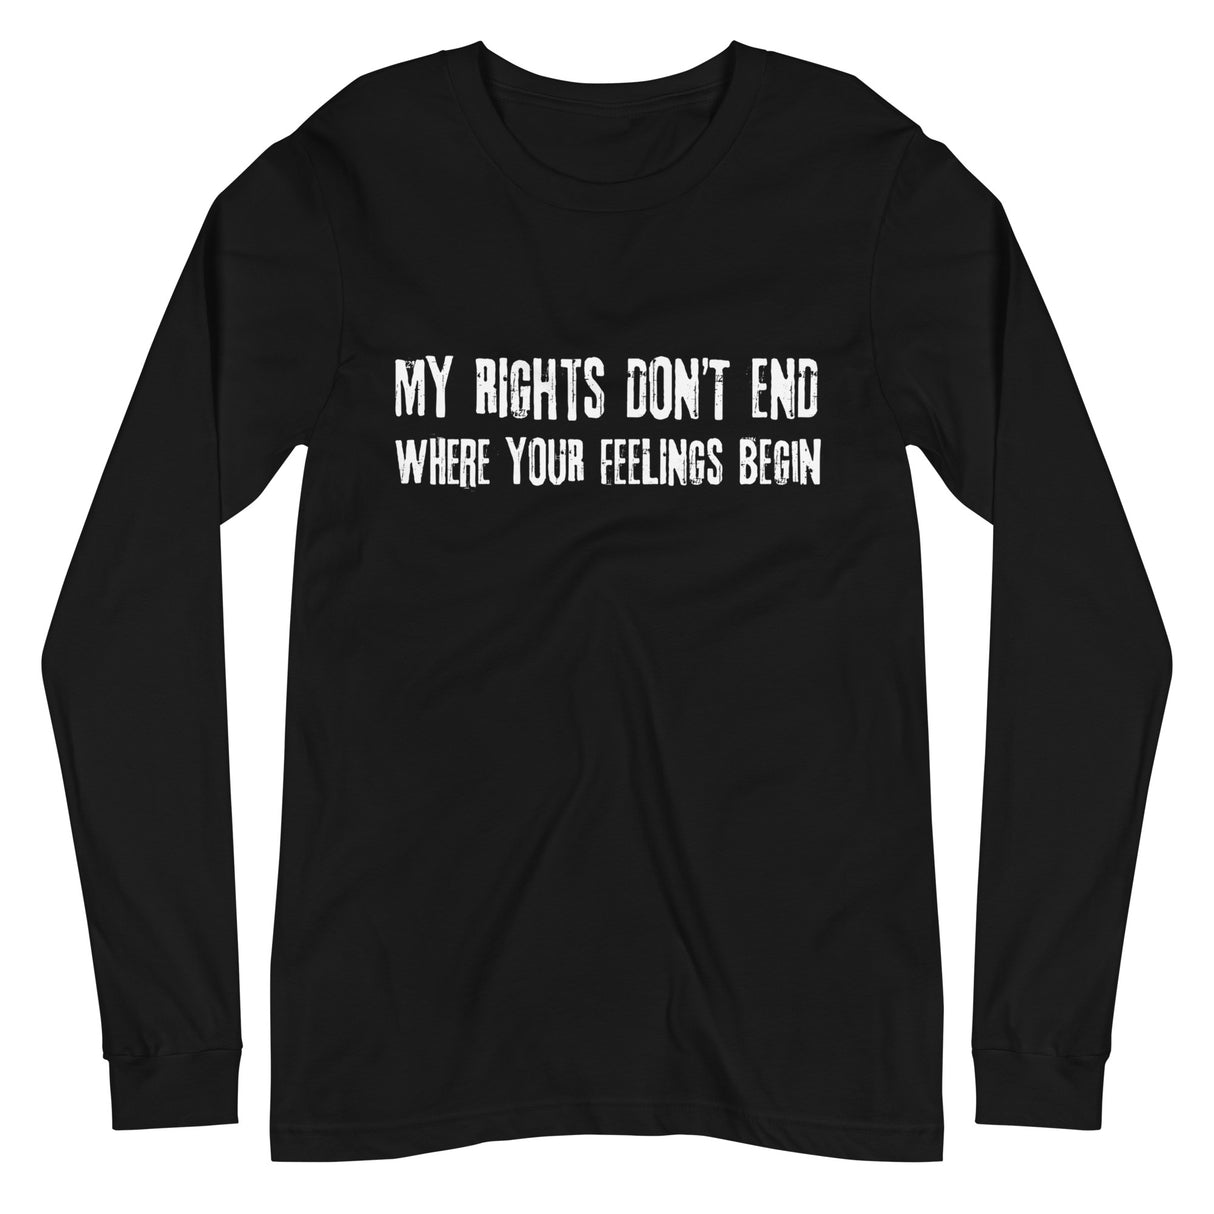 My Rights Don't End Where Your Feelings Begin Premium Long Sleeve Shirt